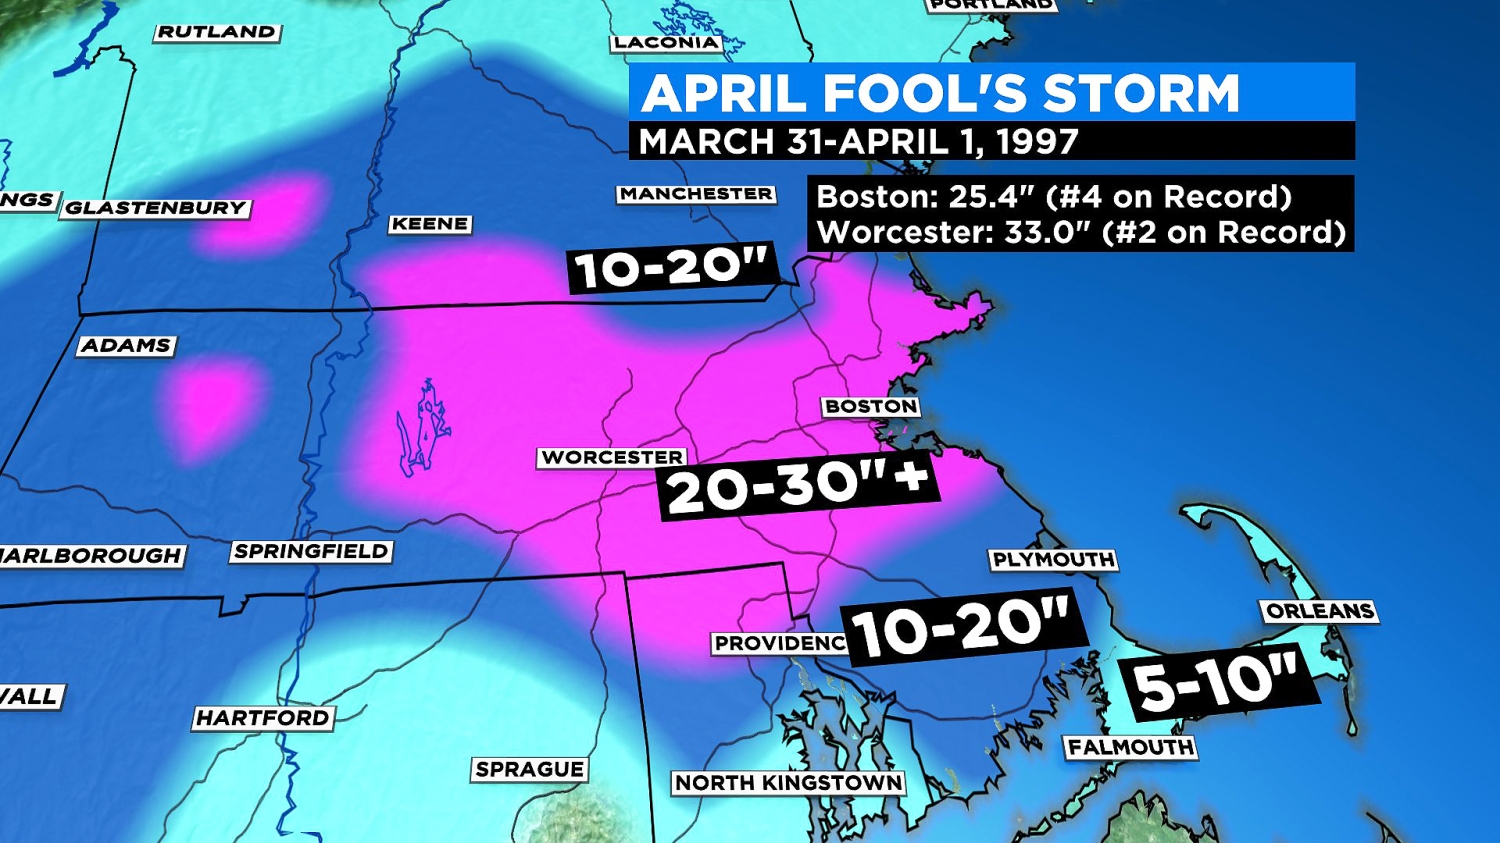 25 Years Ago, April Fools’ Day Blizzard Buried Massachusetts In